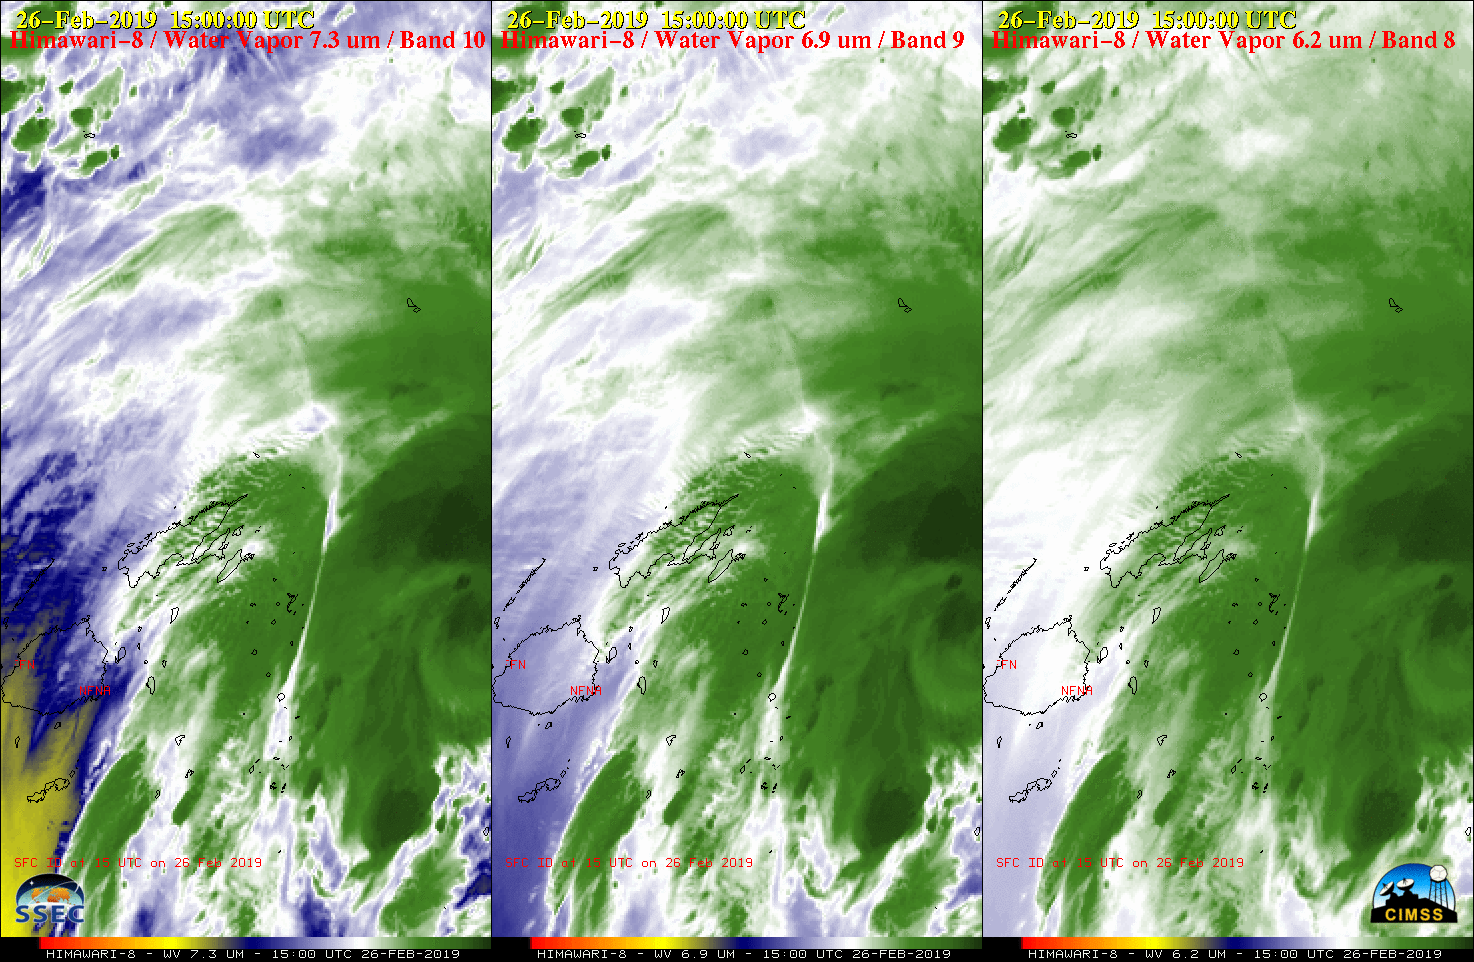 Himawari-8 Low-level (7.3 µm), Mid-level (6.9 µm) and Upper-level (6.2 µm) Water Vapor images [click to play animation | MP4]